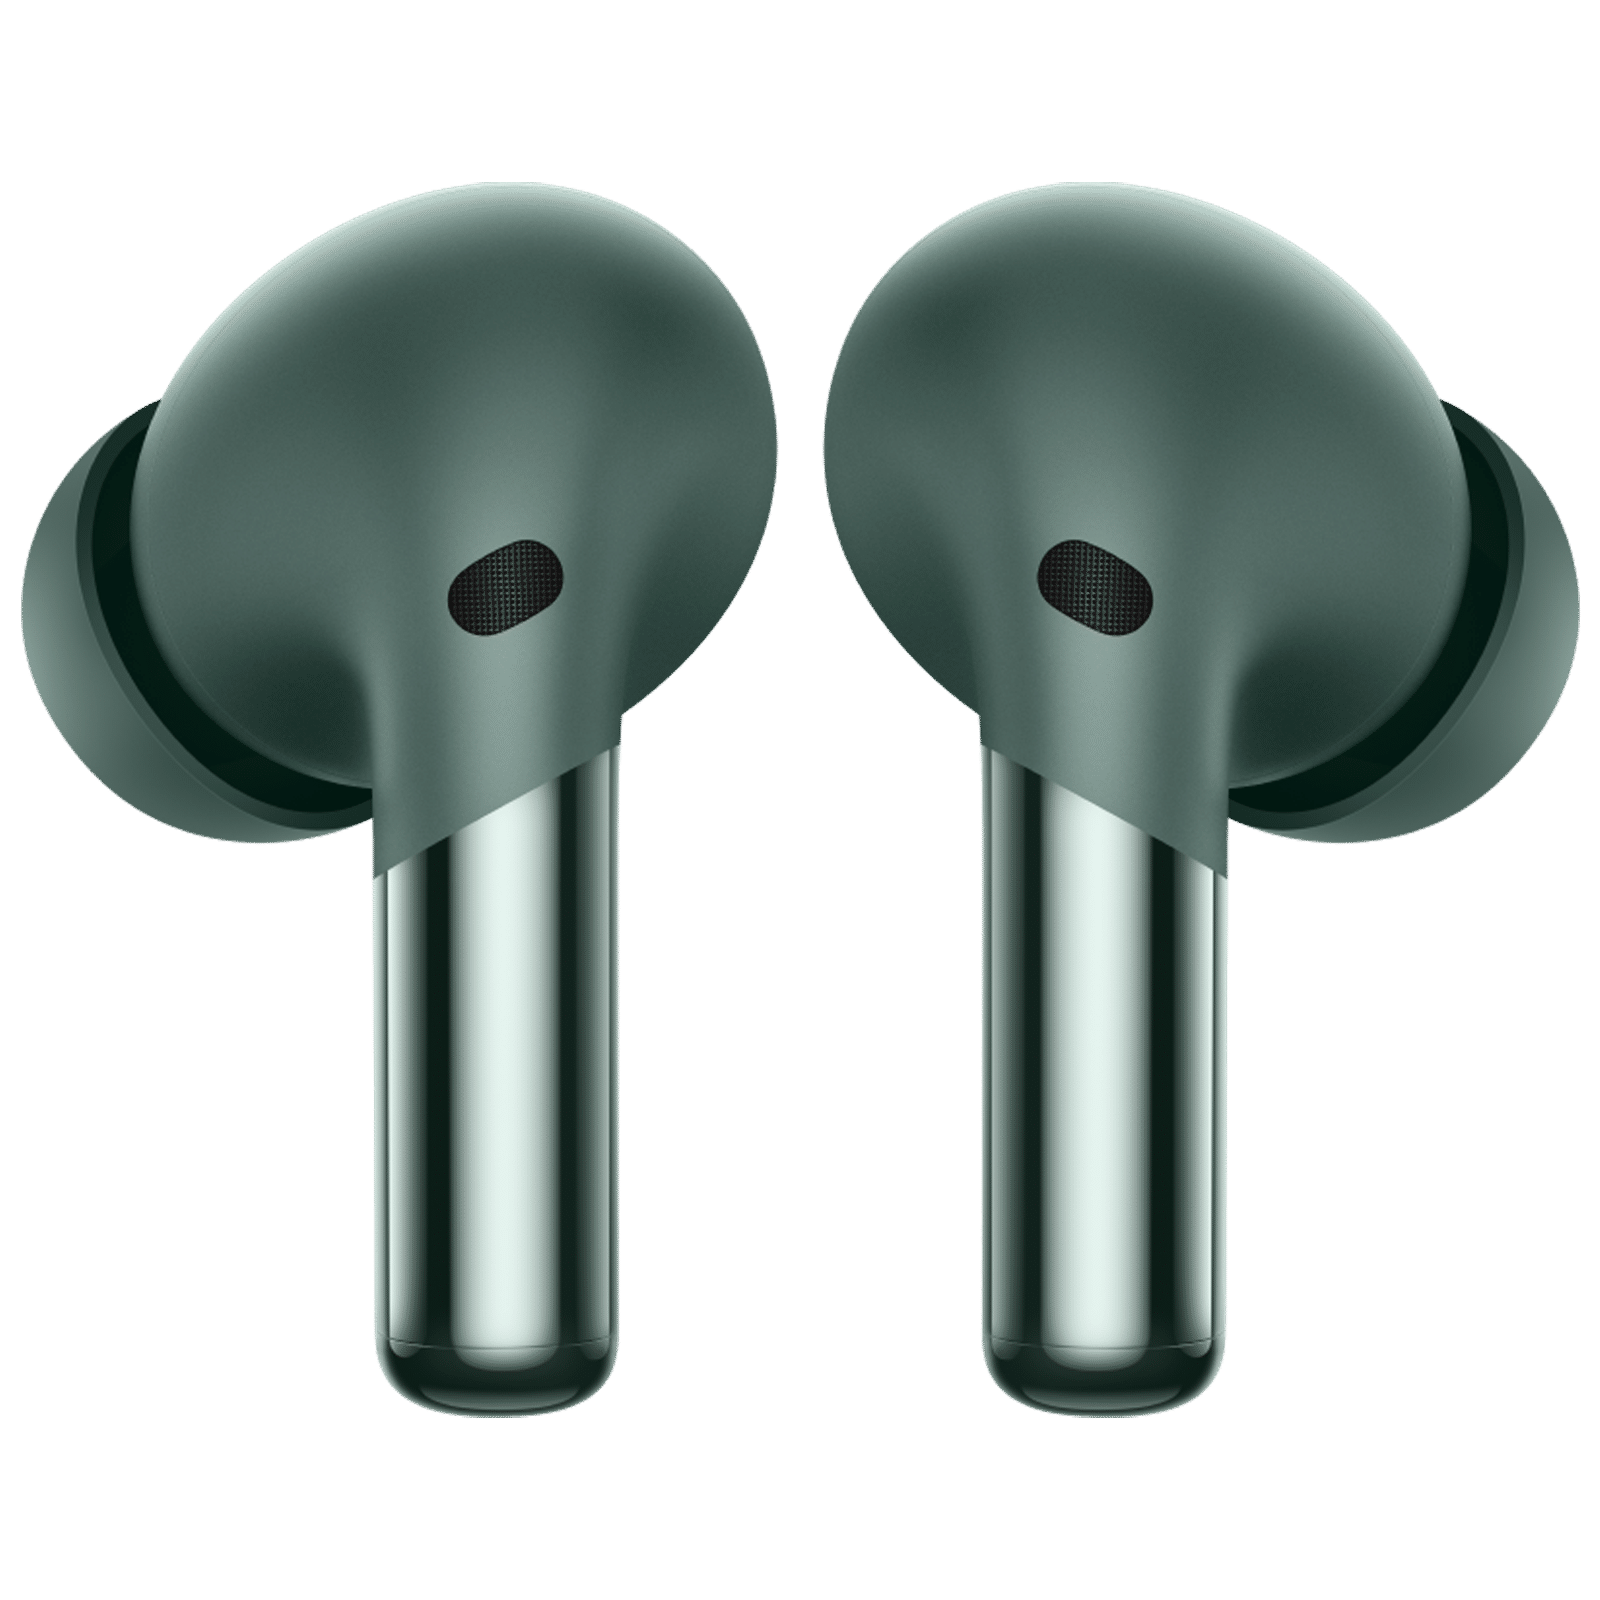 Buy OnePlus Buds Pro 2 TWS Earbuds with Adaptive Noise Cancellation ...